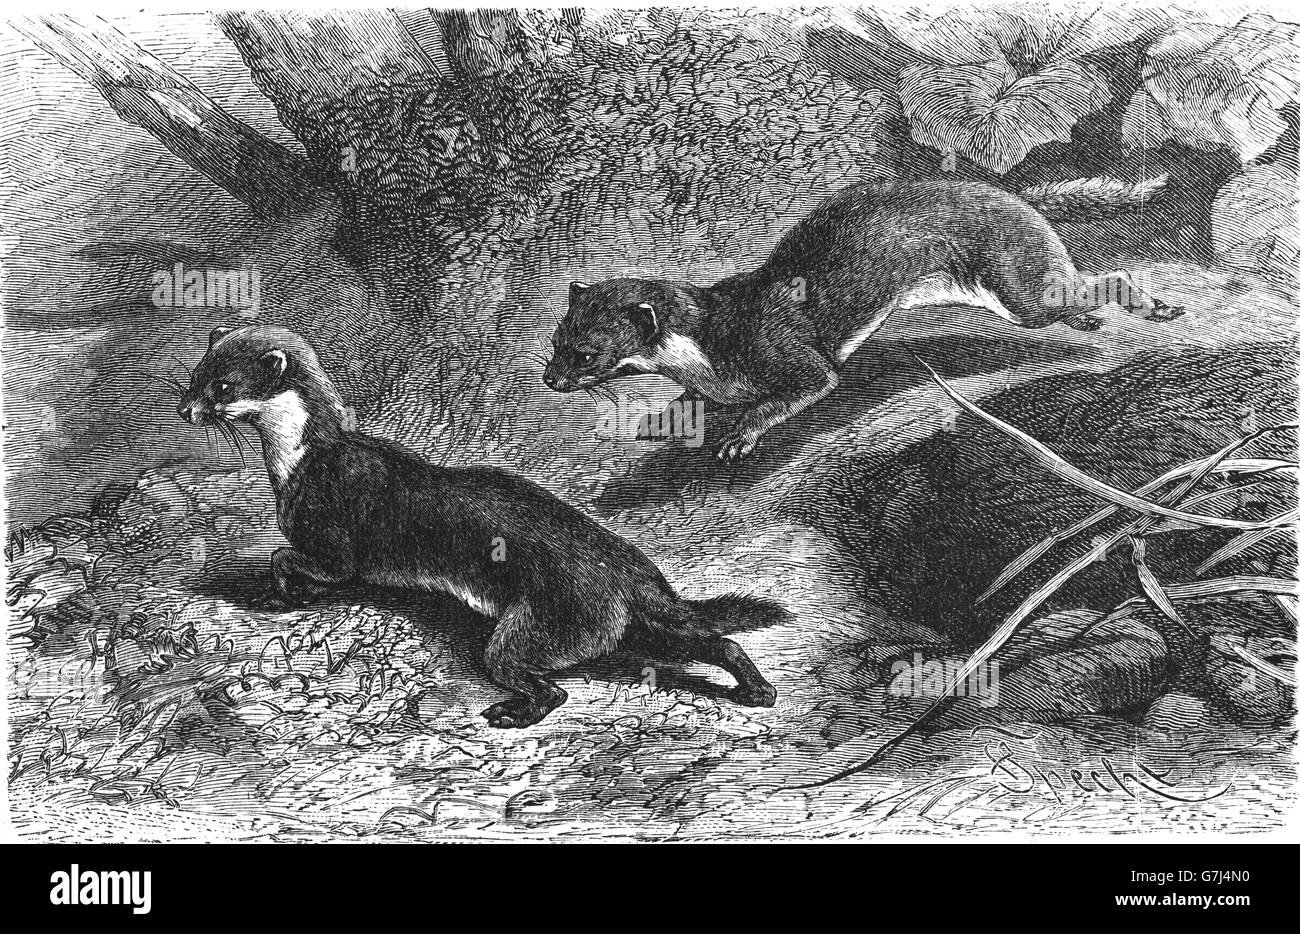 Least weasel, Mustela nivalis, illustration from book dated 1904 Stock Photo